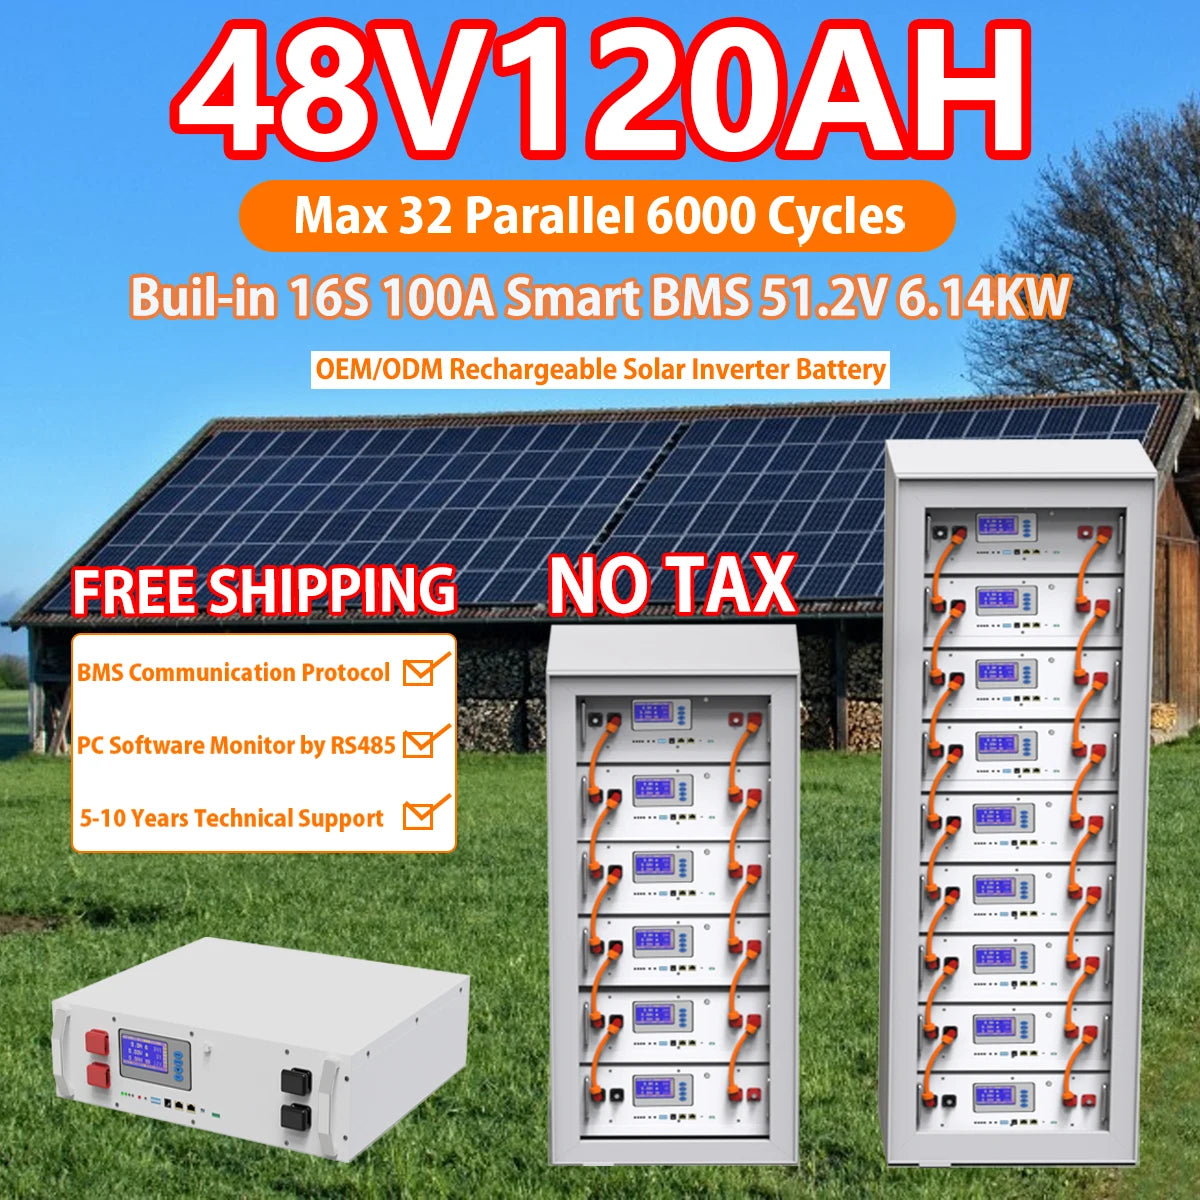 48V 120Ah LiFePO4 Battery, 48V battery pack with built-in BMS, solar inverter compatible, up to 32 parallel connections.